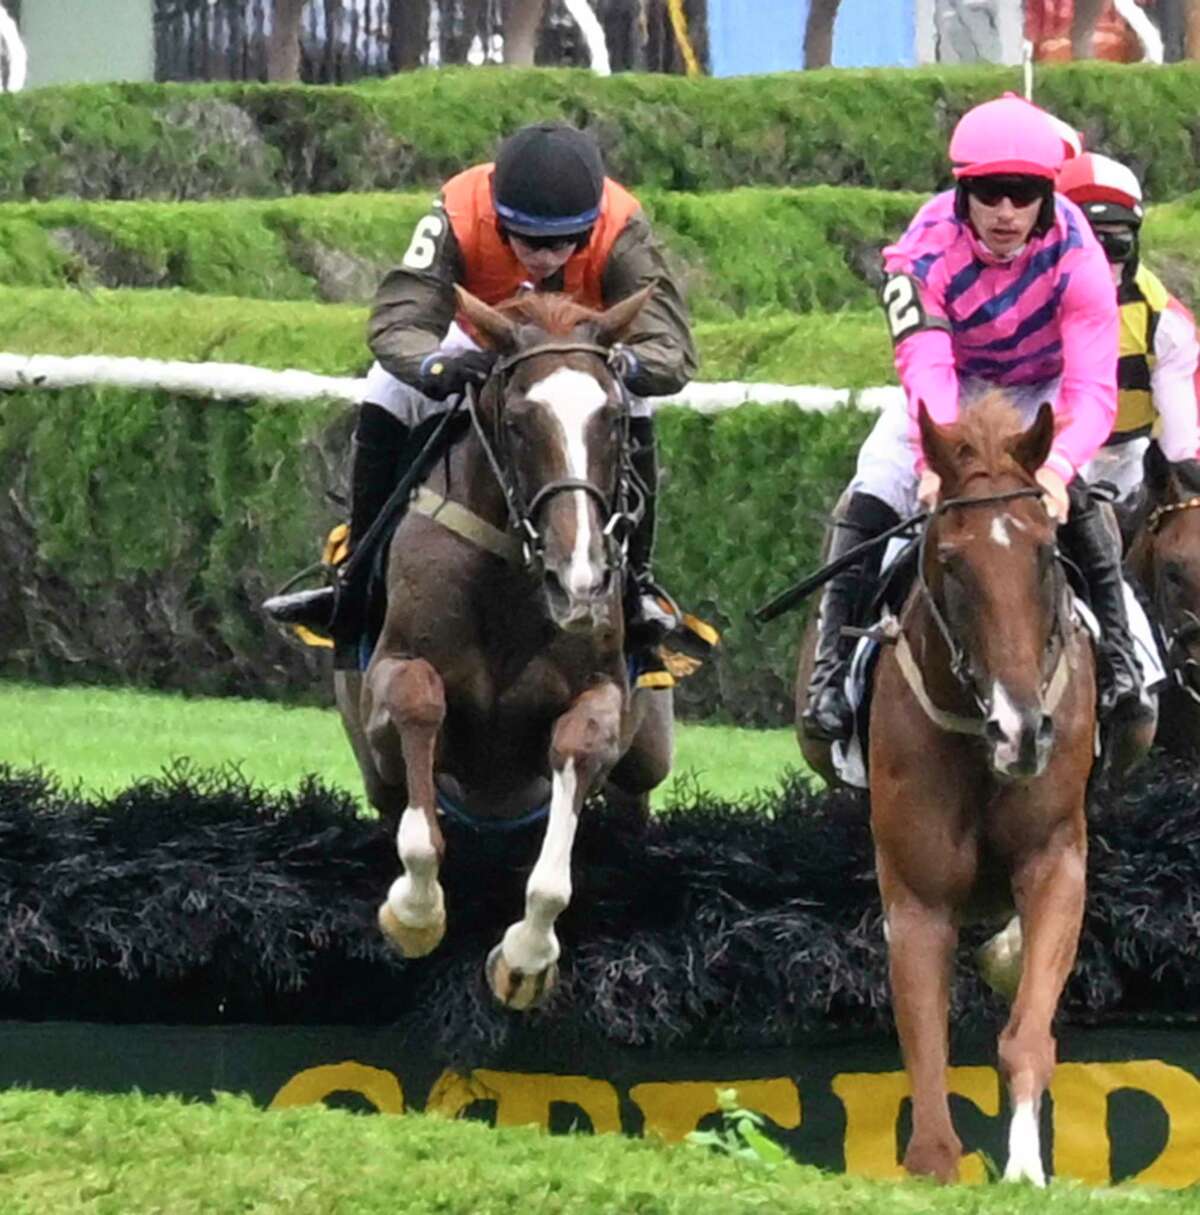 State of Affair, left, with jockey Thomas Garner, battles for the lead with Hurtgen Forest and Jamie Bargary in the 2 1/16-mile steeplechase allowance race at Saratoga Race Course on Wednesday Aug. 10, 2022.